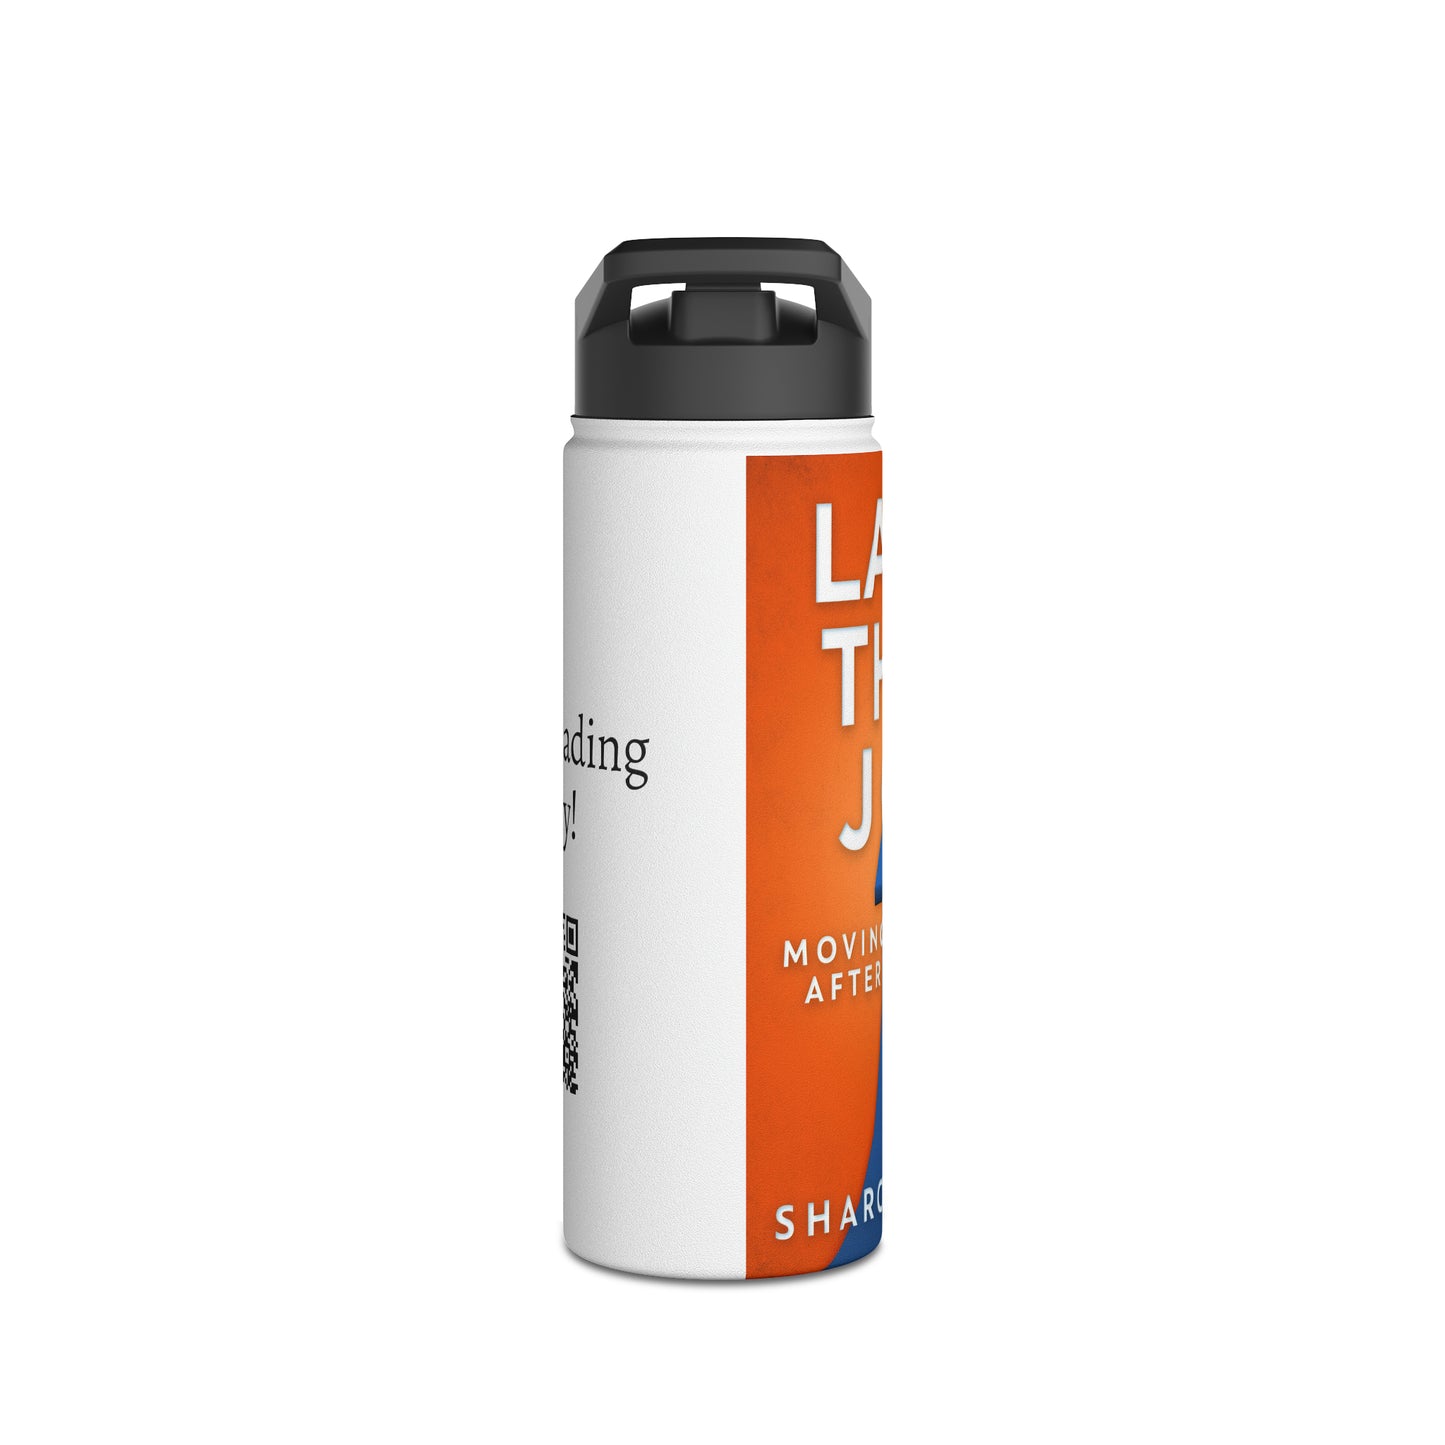 Land That Job - Moving Forward After Covid-19 - Stainless Steel Water Bottle